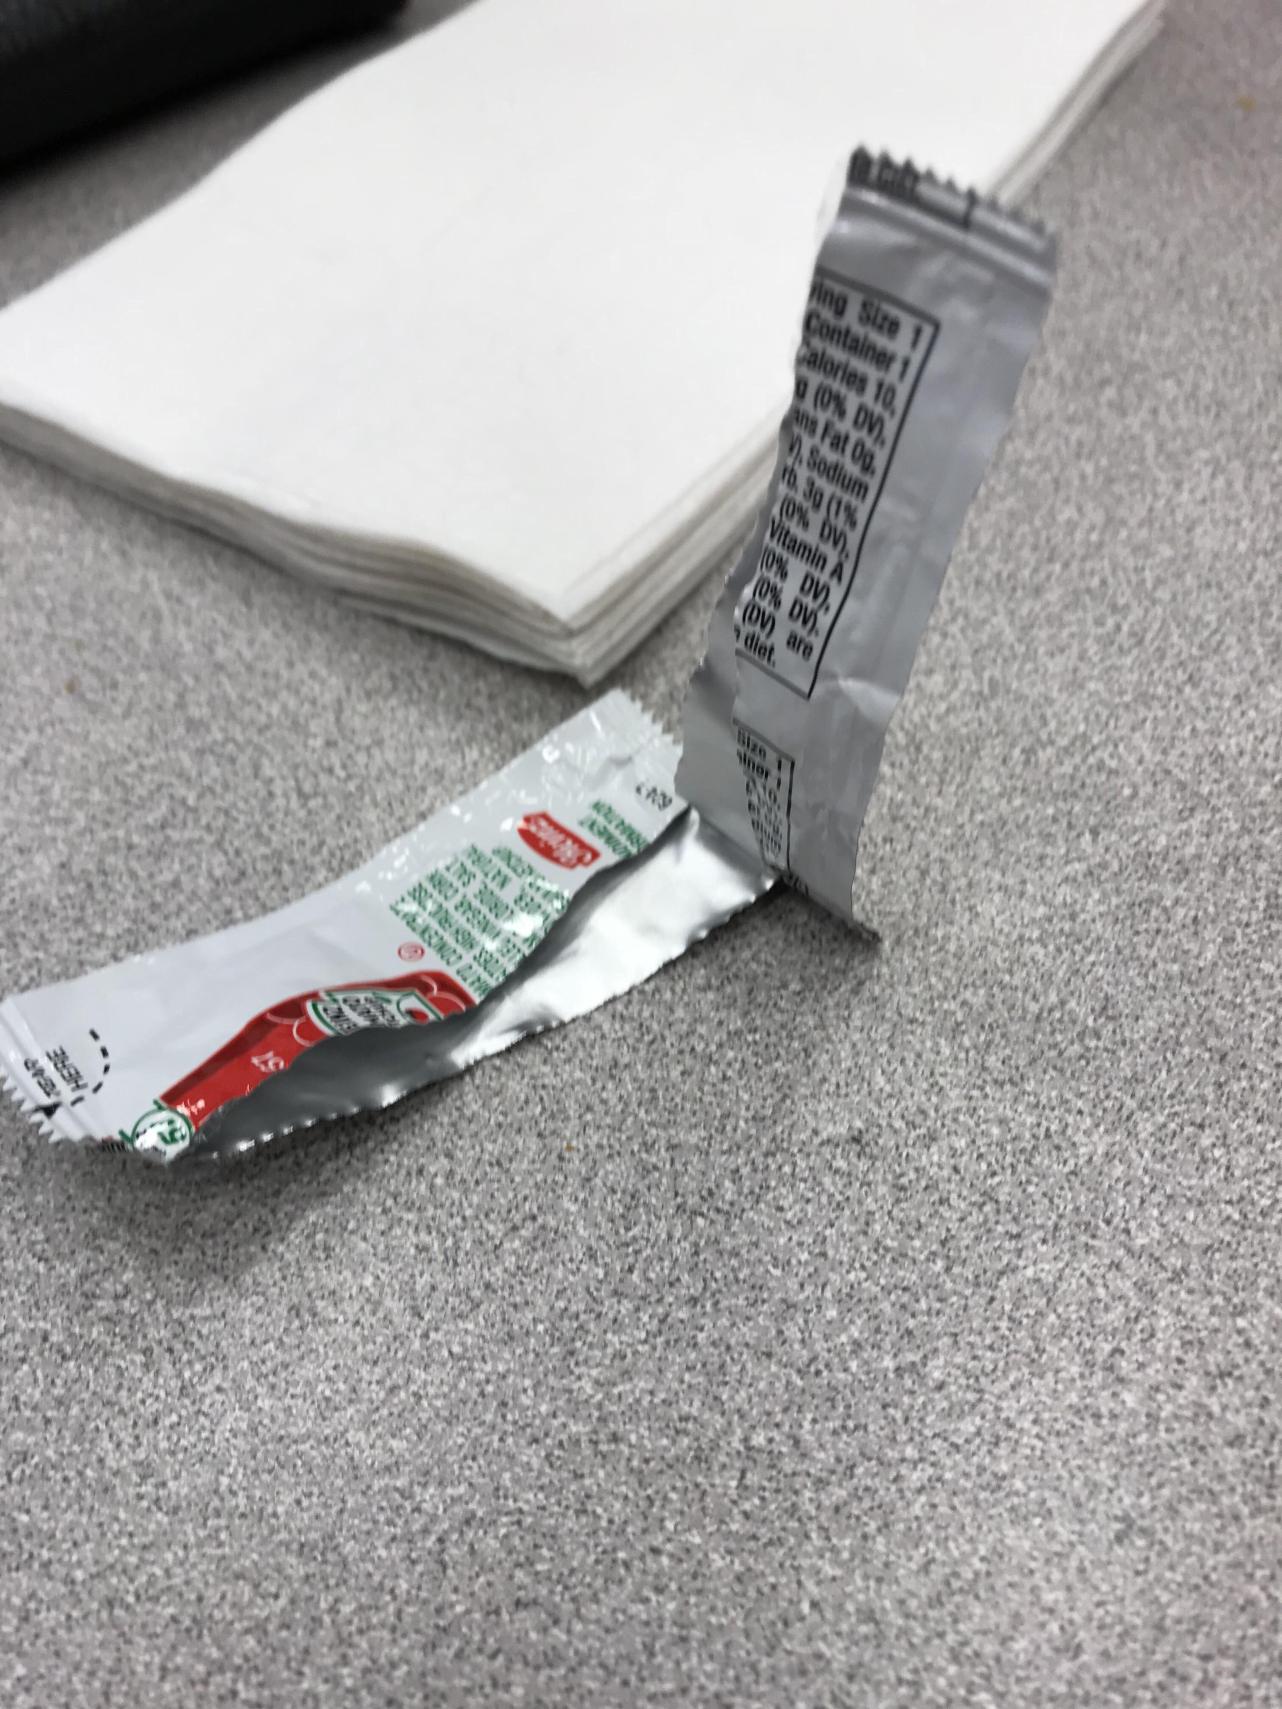 Ketchup packet that is totally empty